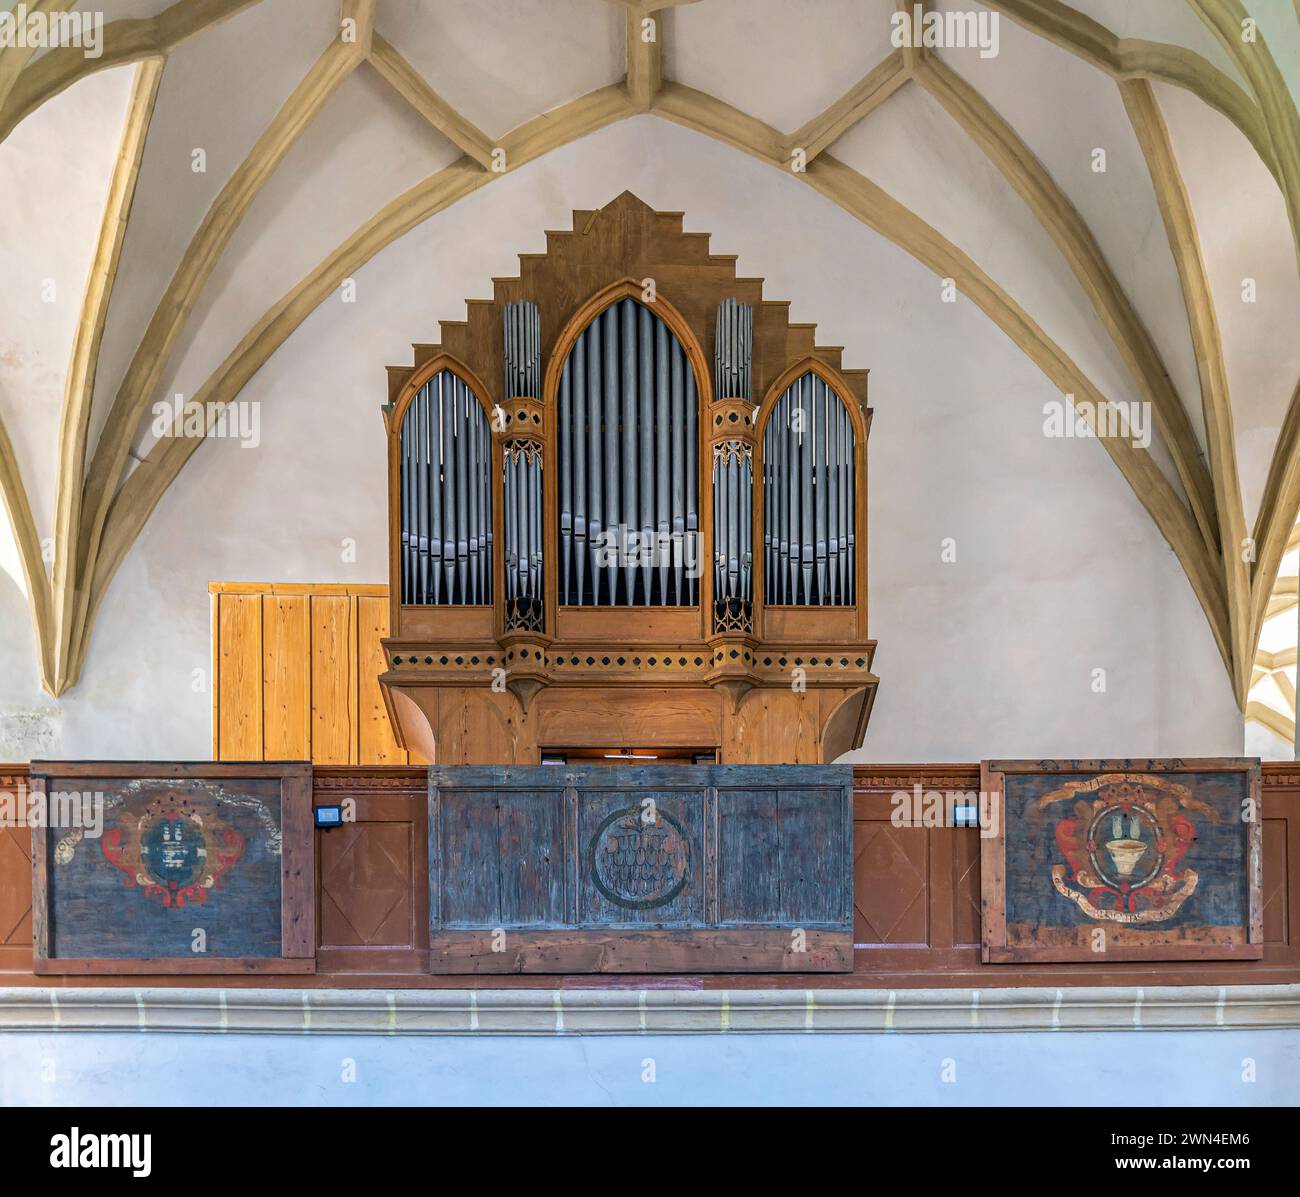 SIGHISOARA,ROMANIA-SEPTEMBER 3,2021:Old organ in the Church on the hill,an evangelical church built between 1345-1525.Dedicated to St. Nicholas,it is Stock Photo